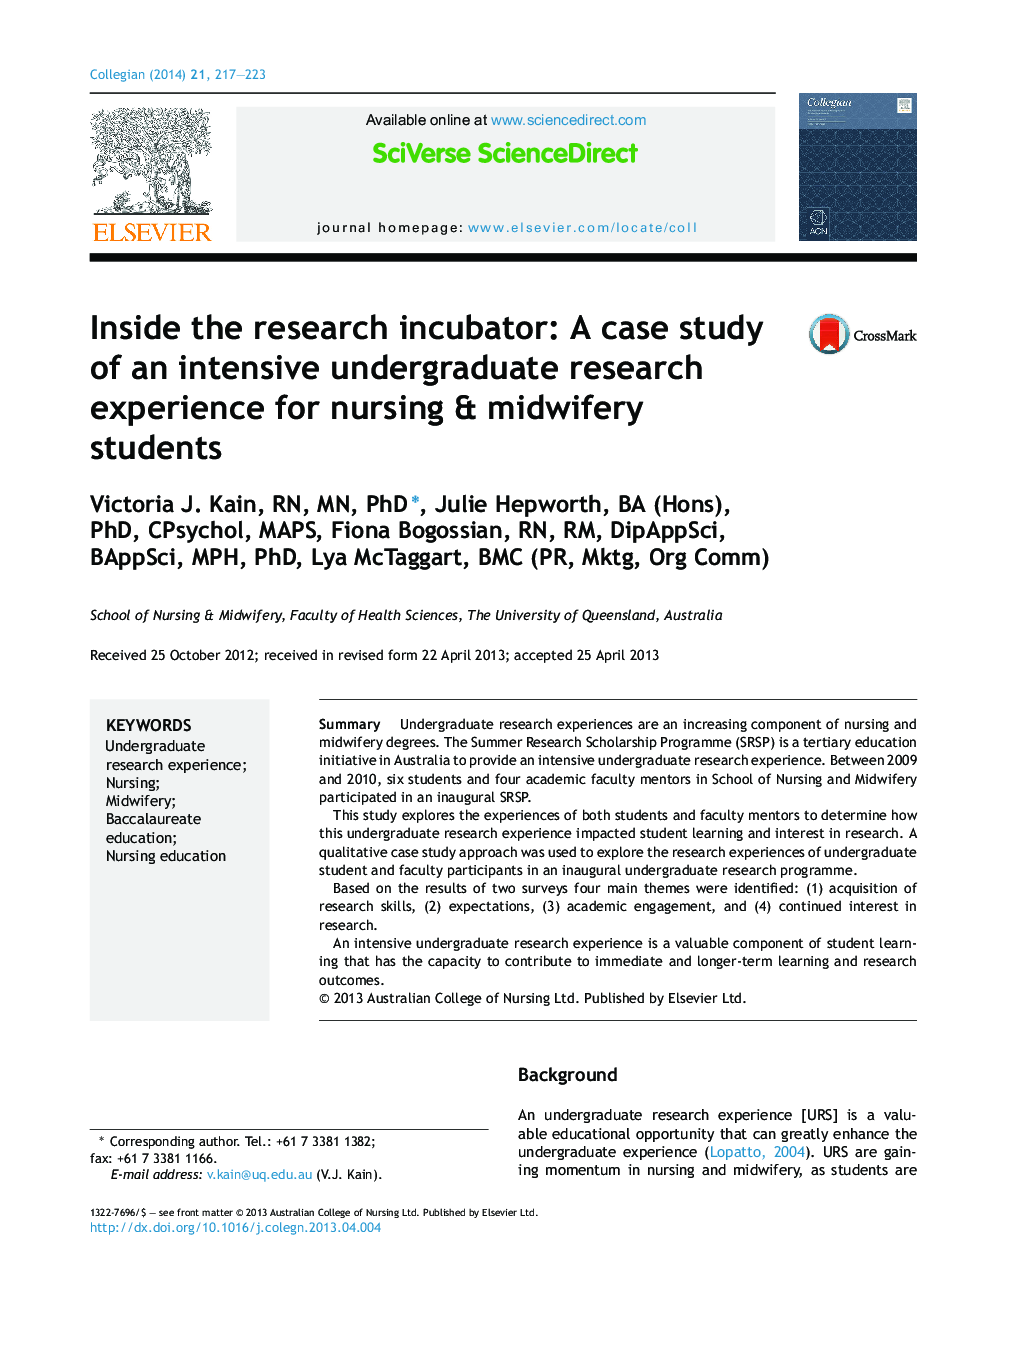 Inside the research incubator: A case study of an intensive undergraduate research experience for nursing & midwifery students